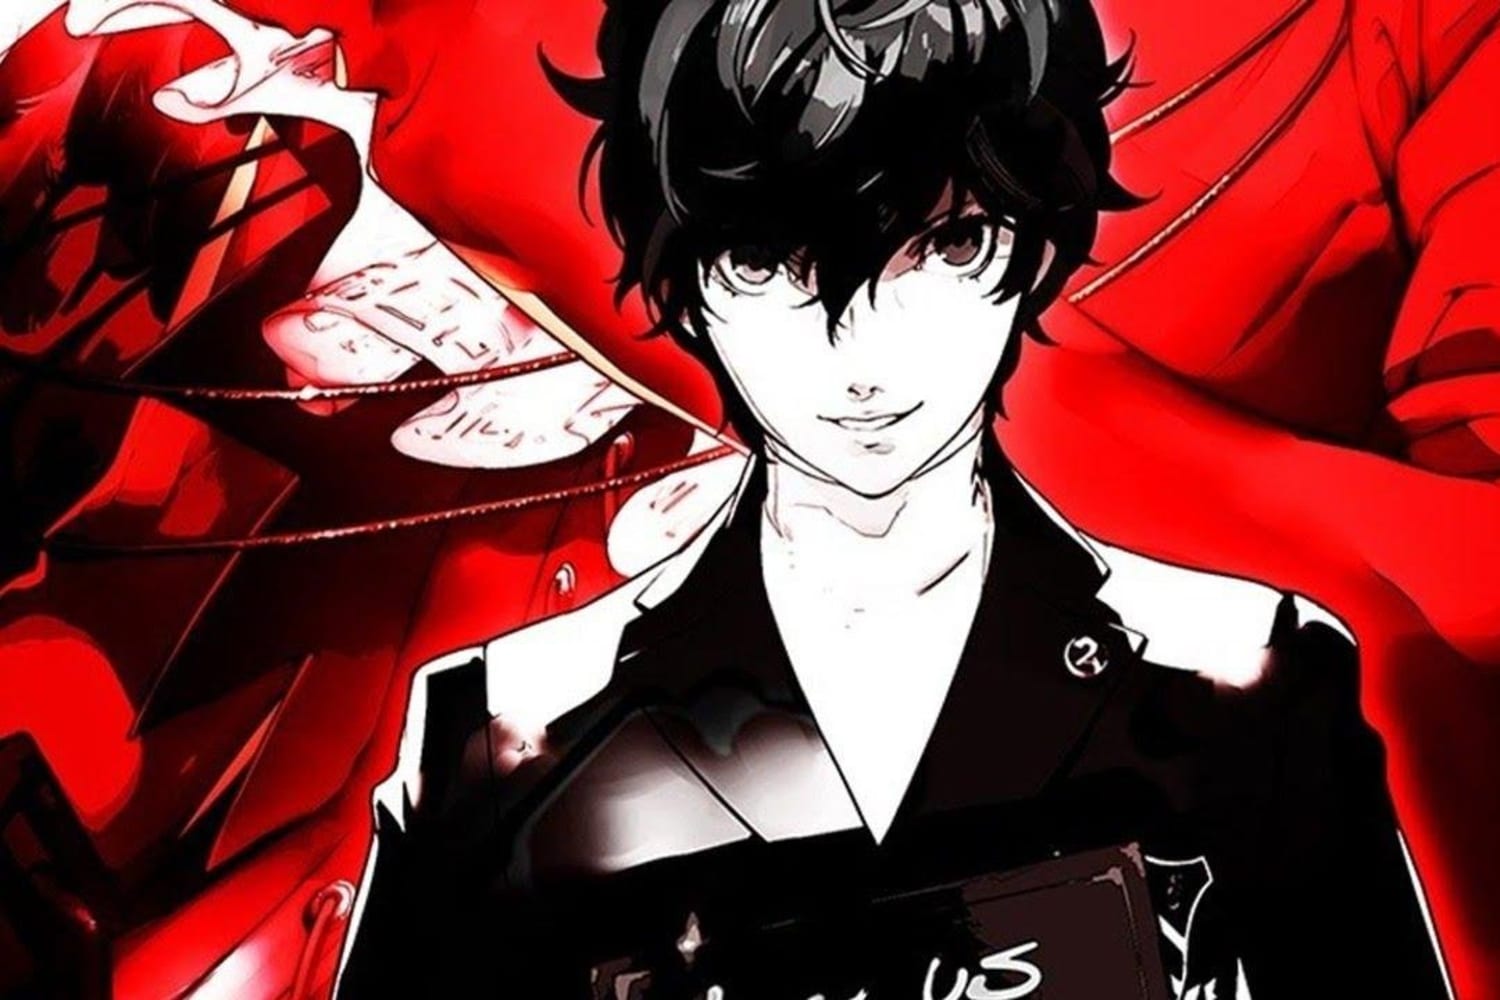 Persona 5 tips to guide you through the dungeons